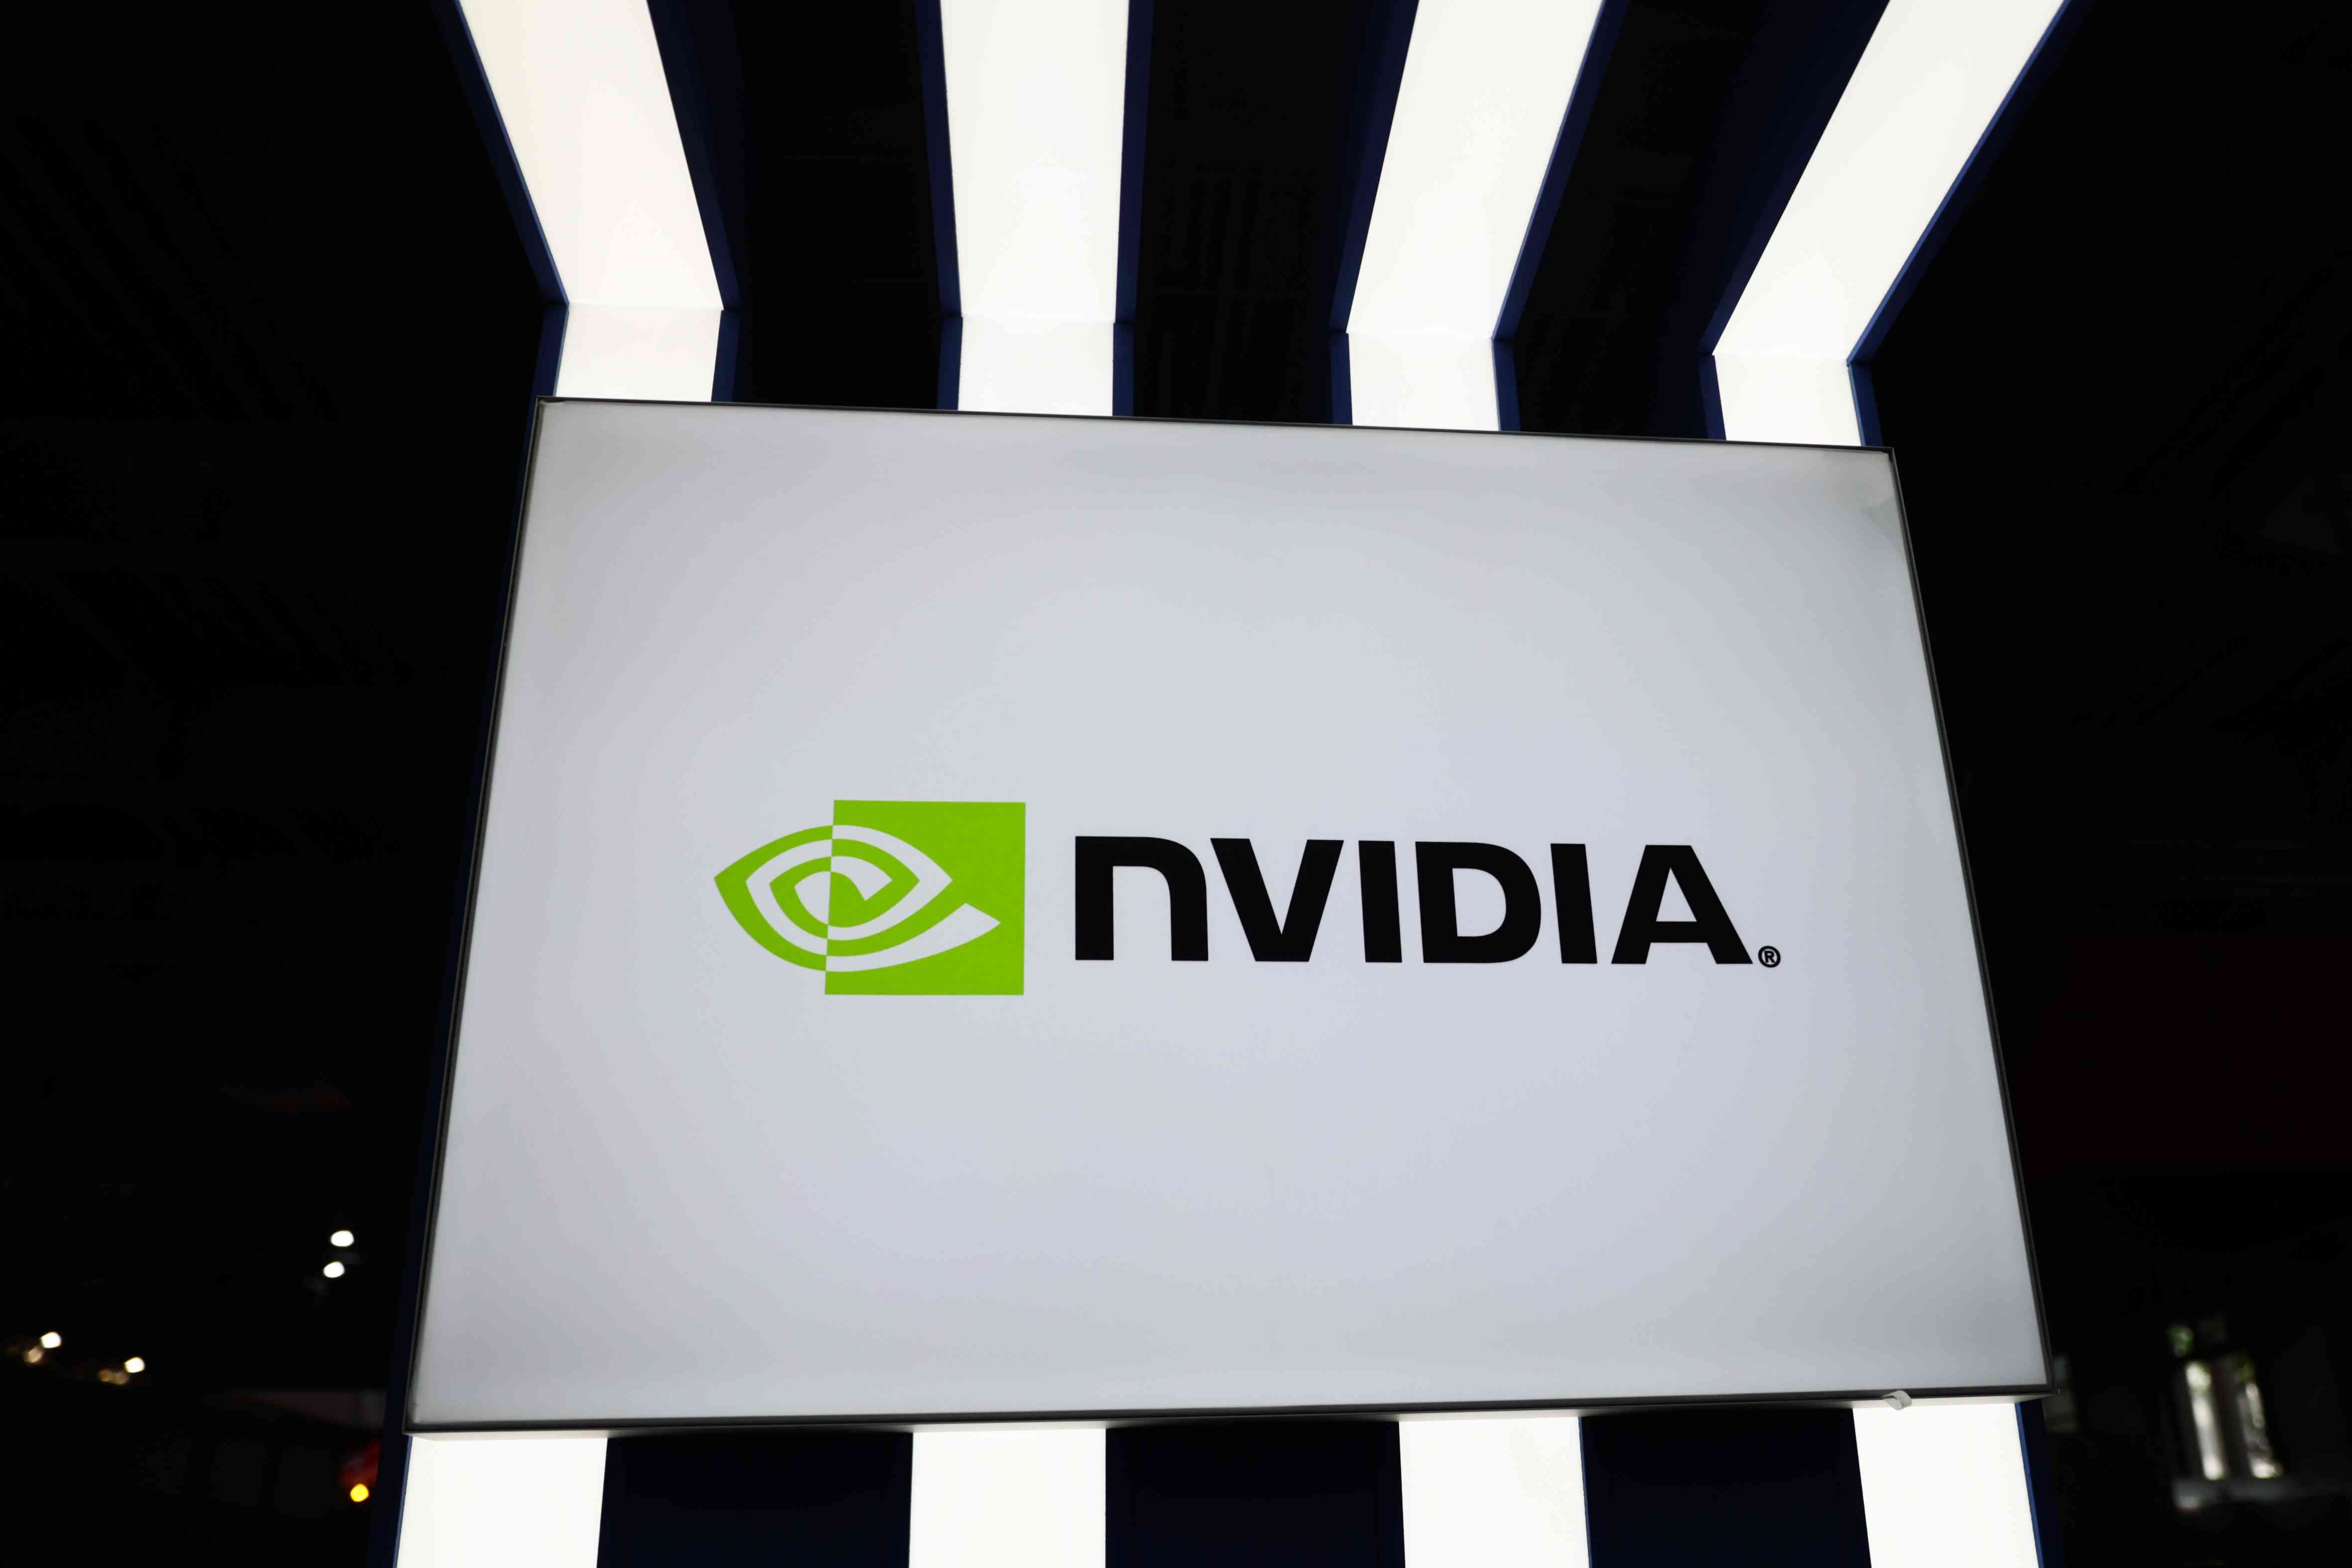 The Nvidia logo on display at an event.